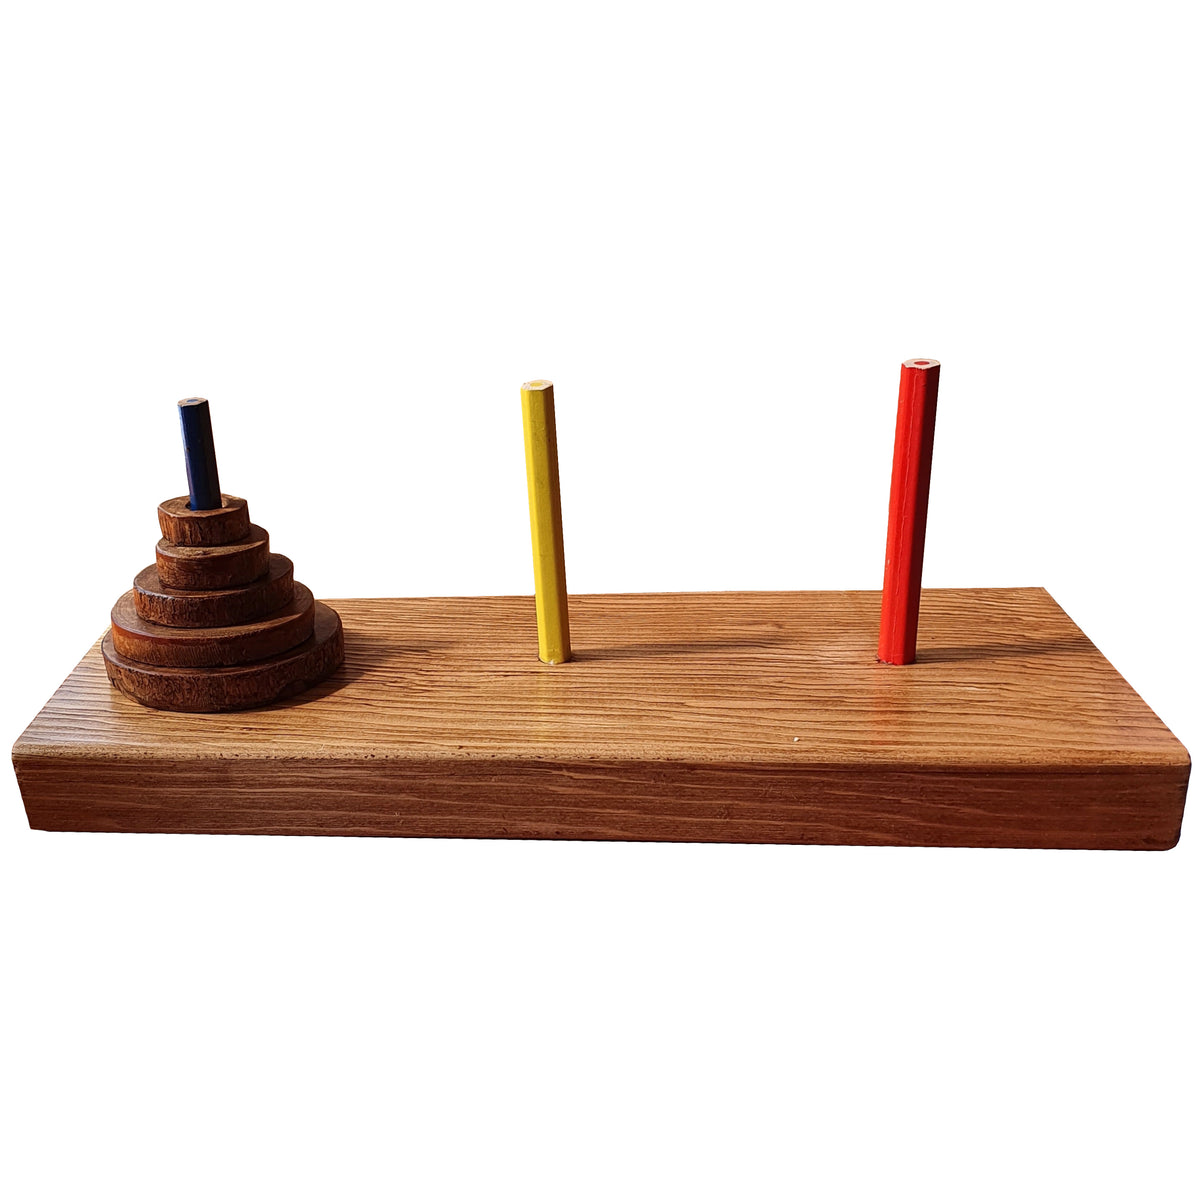 Tower of Hanoi Wooden Puzzle